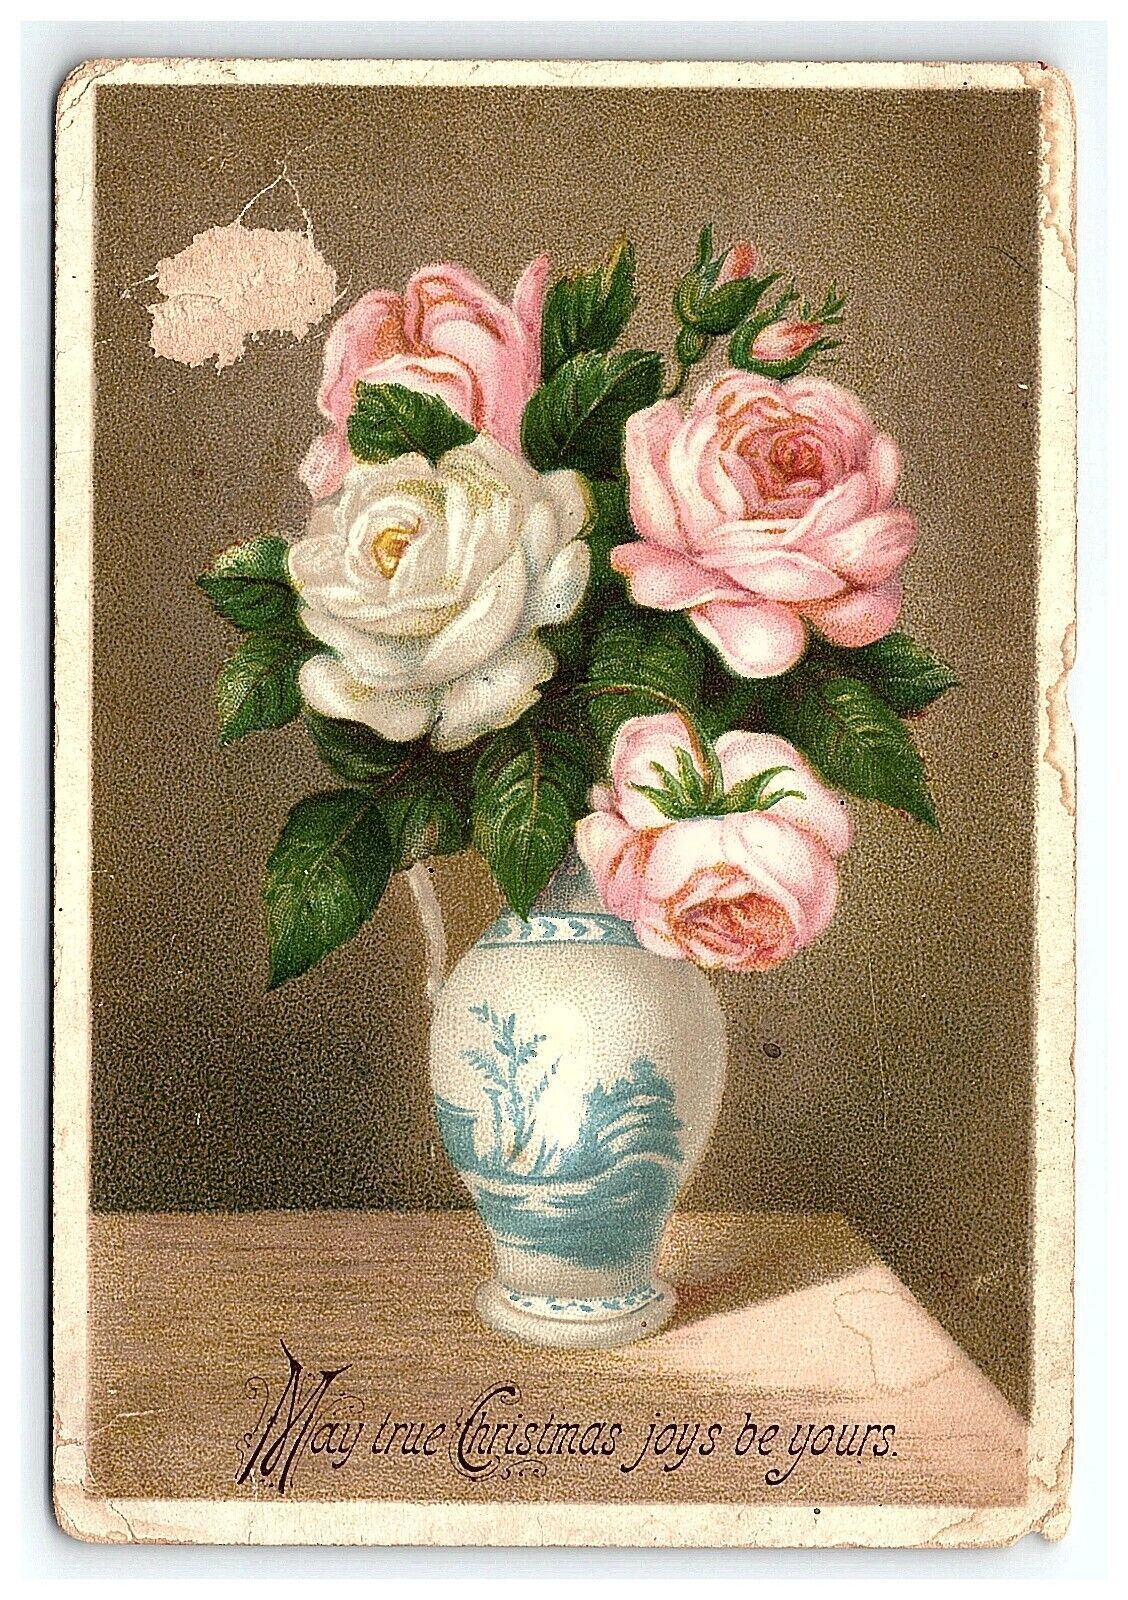 1883 May True Christmas Joys Be Yours Card Victorian Vase Pink White Roses